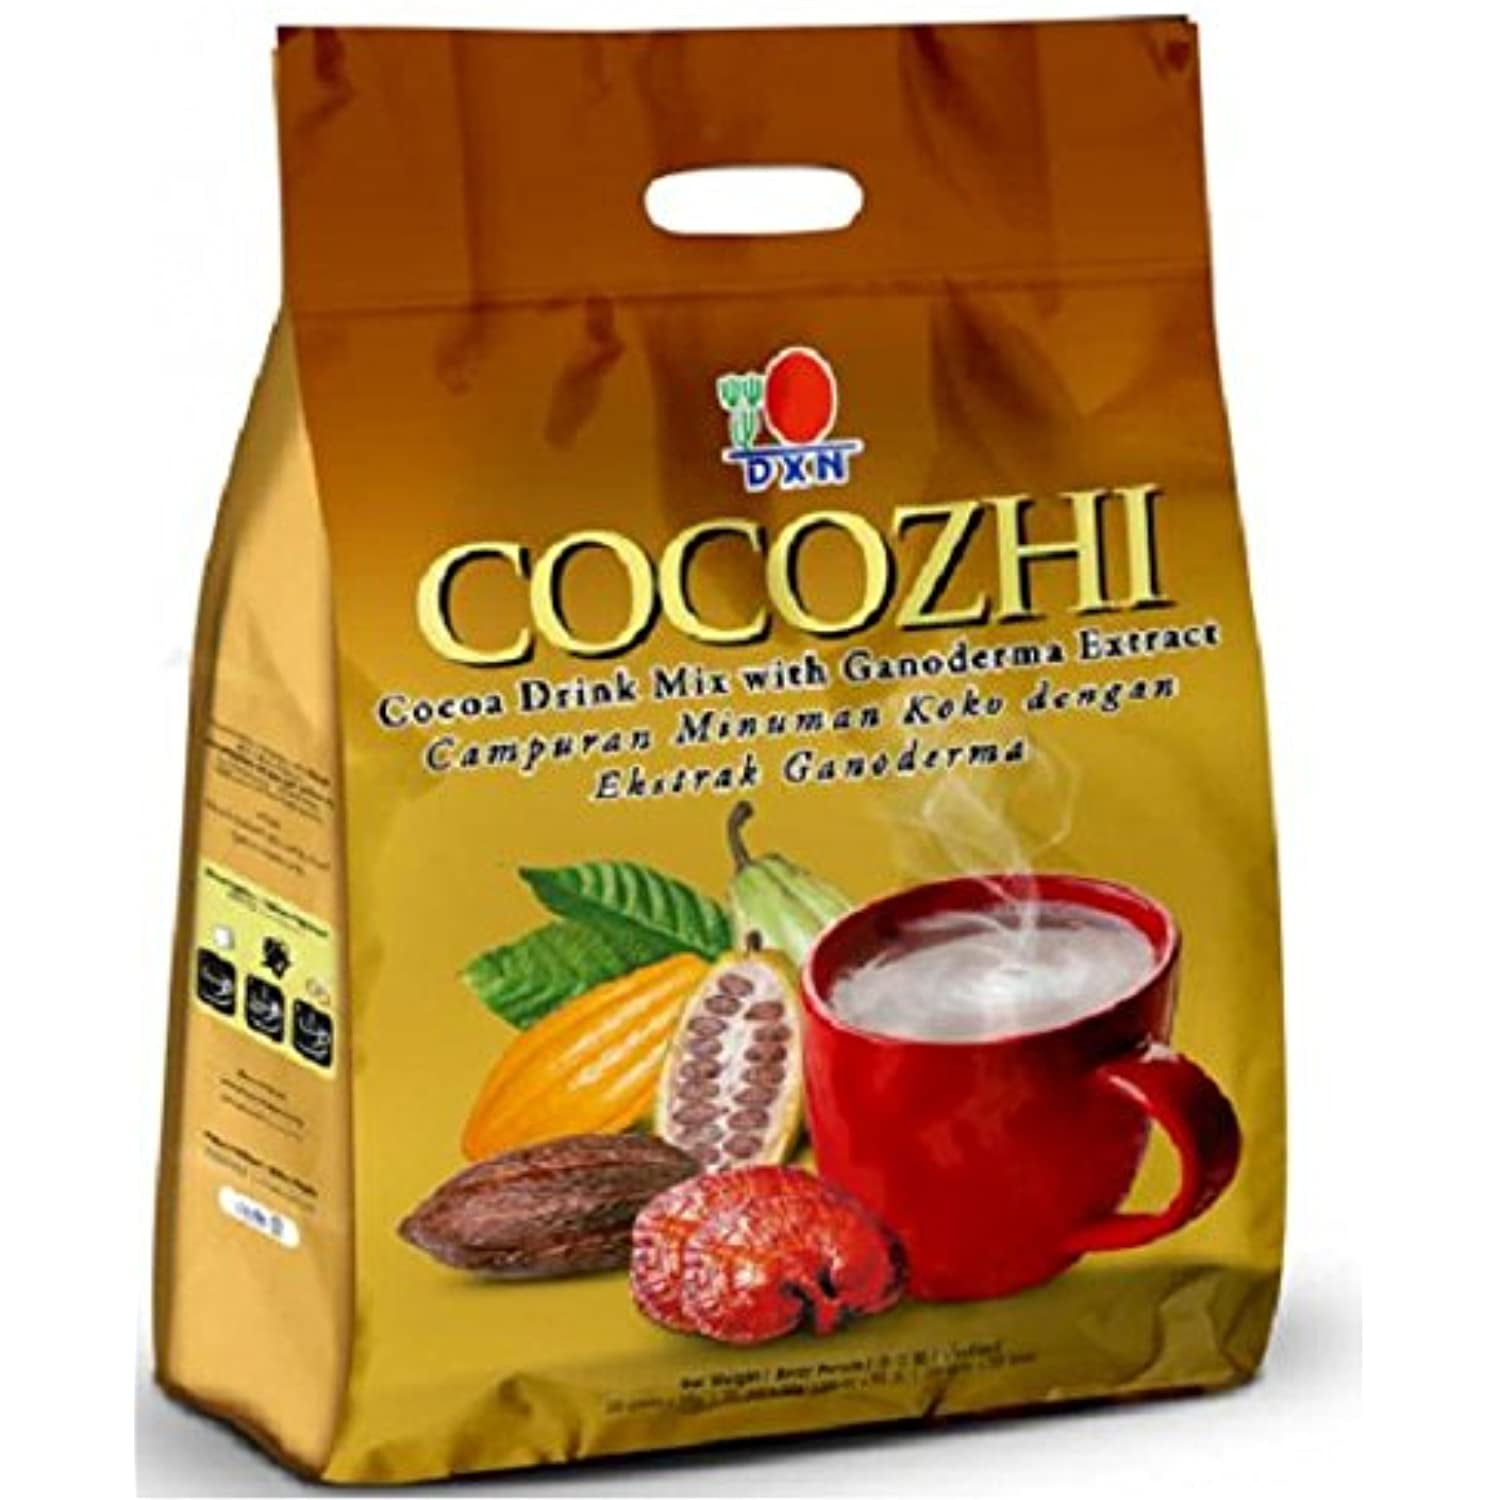 12 Packs Dxn Cocozhi Cocoa Drink 20 Sachets - Walmart.com